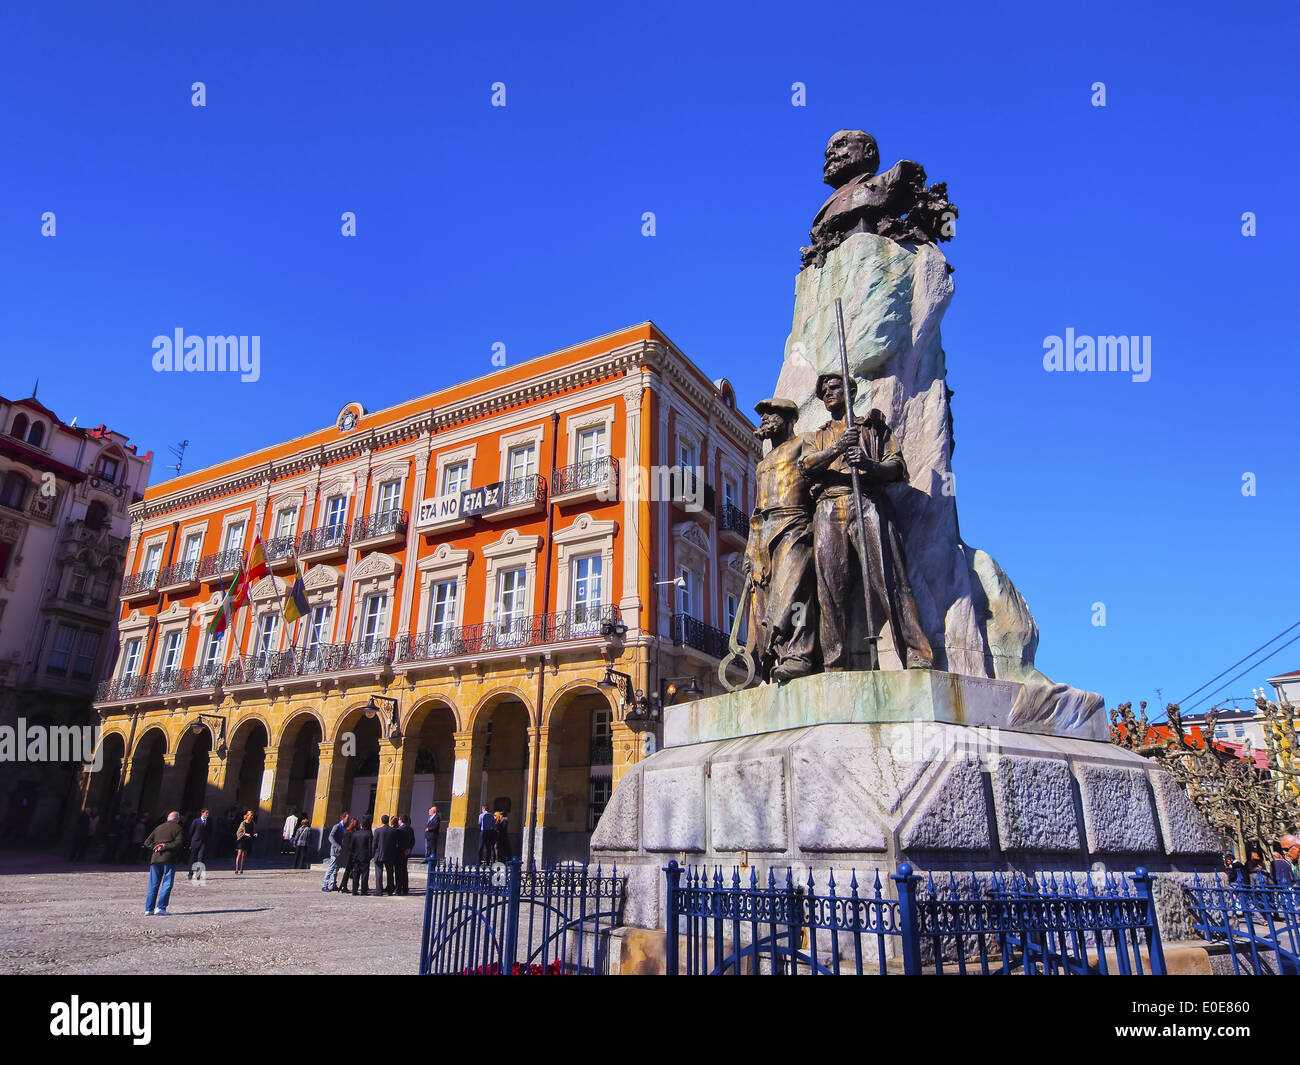 Portugalete near Bilbao, Biscay, Basque Country, Spain Stock Photo